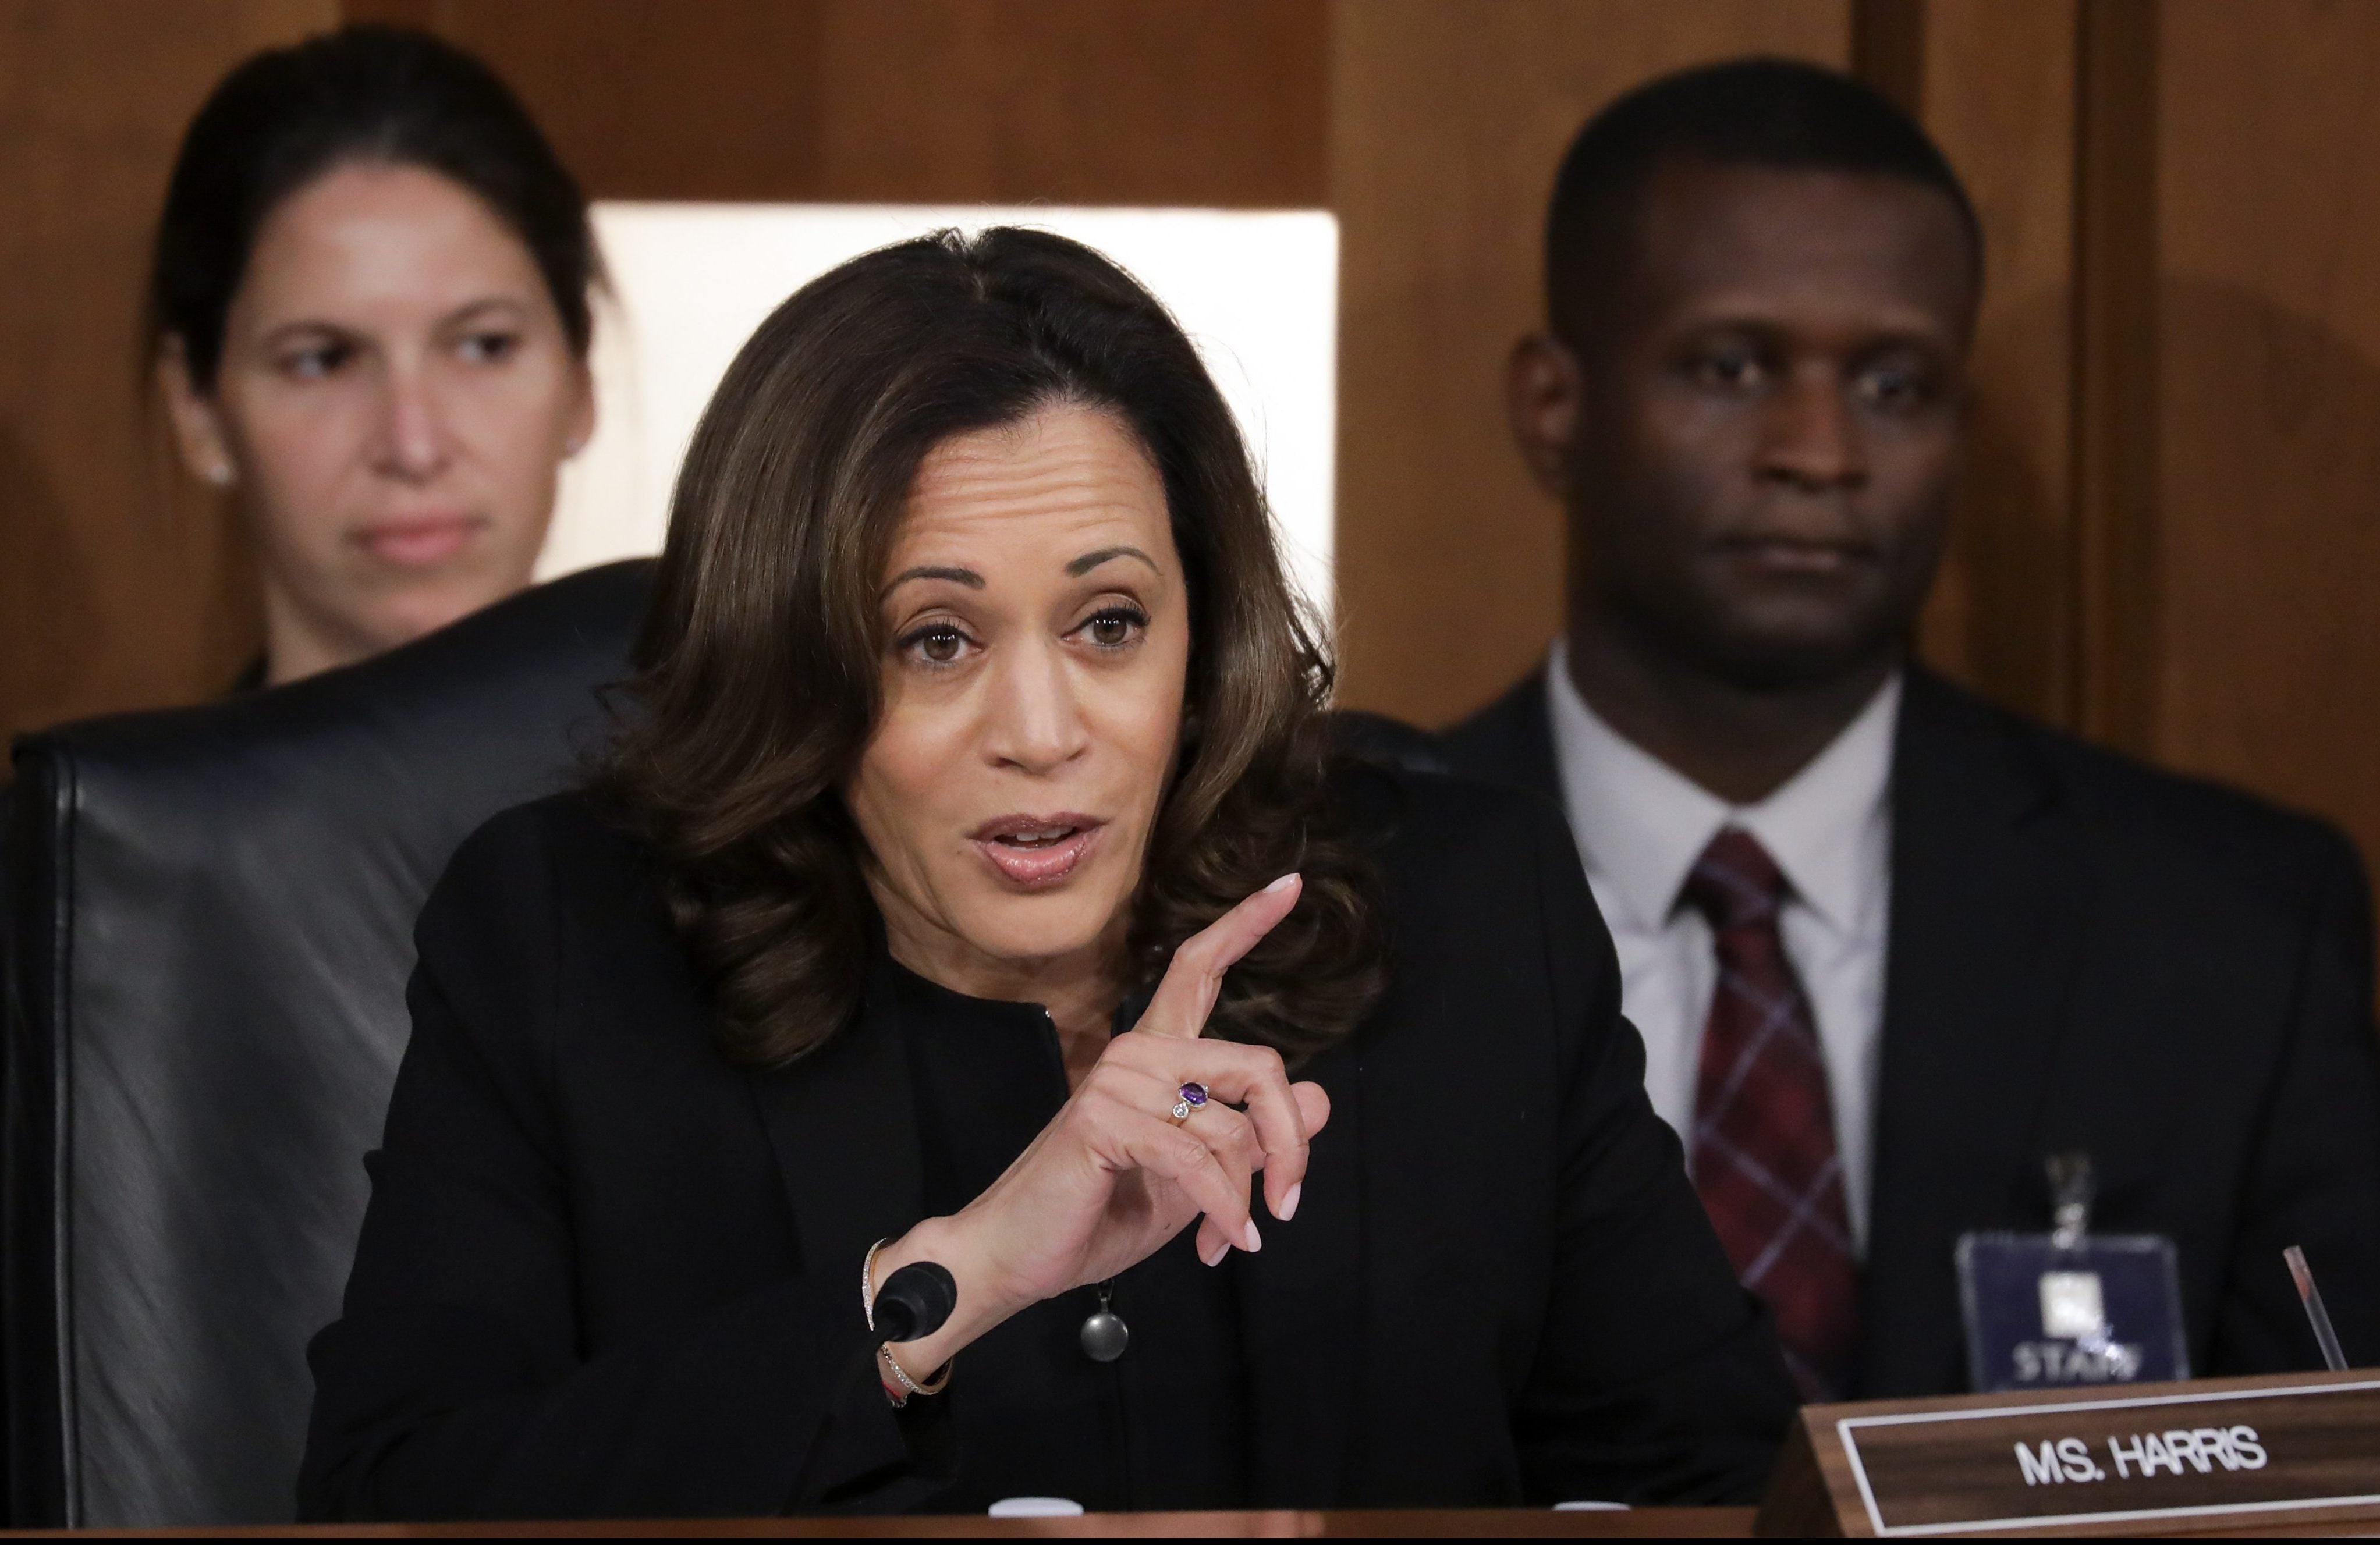 Sen. Kamala Harris, D-Calif., questions Supreme Court nominee Judge Brett Kavanaugh before the Senate Judiciary Committee on the third day of his Supreme Court confirmation Thursday.